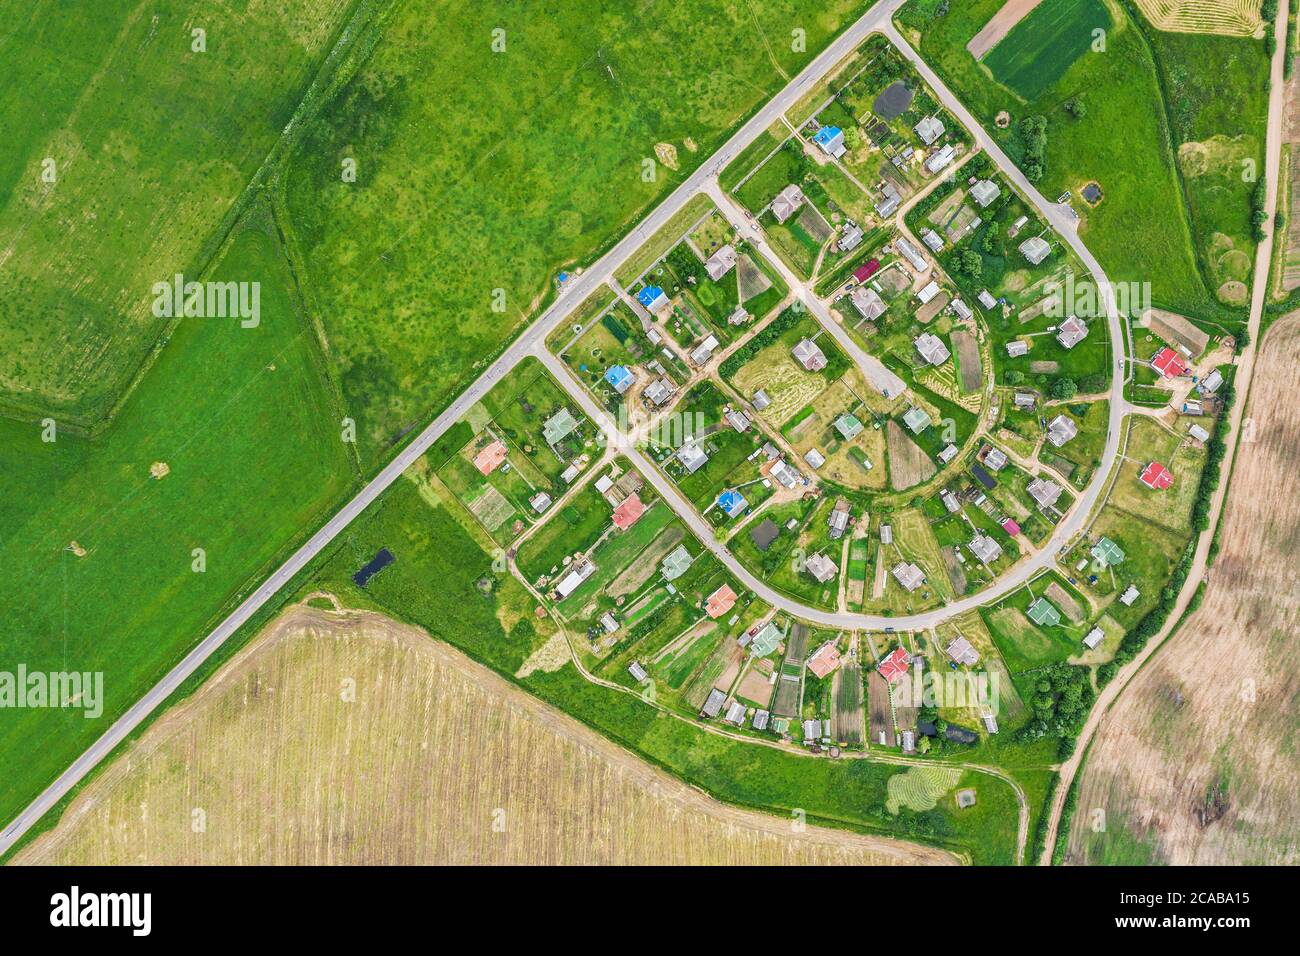 planned residential community in countryside. rural summer landscape, aerial top view Stock Photo